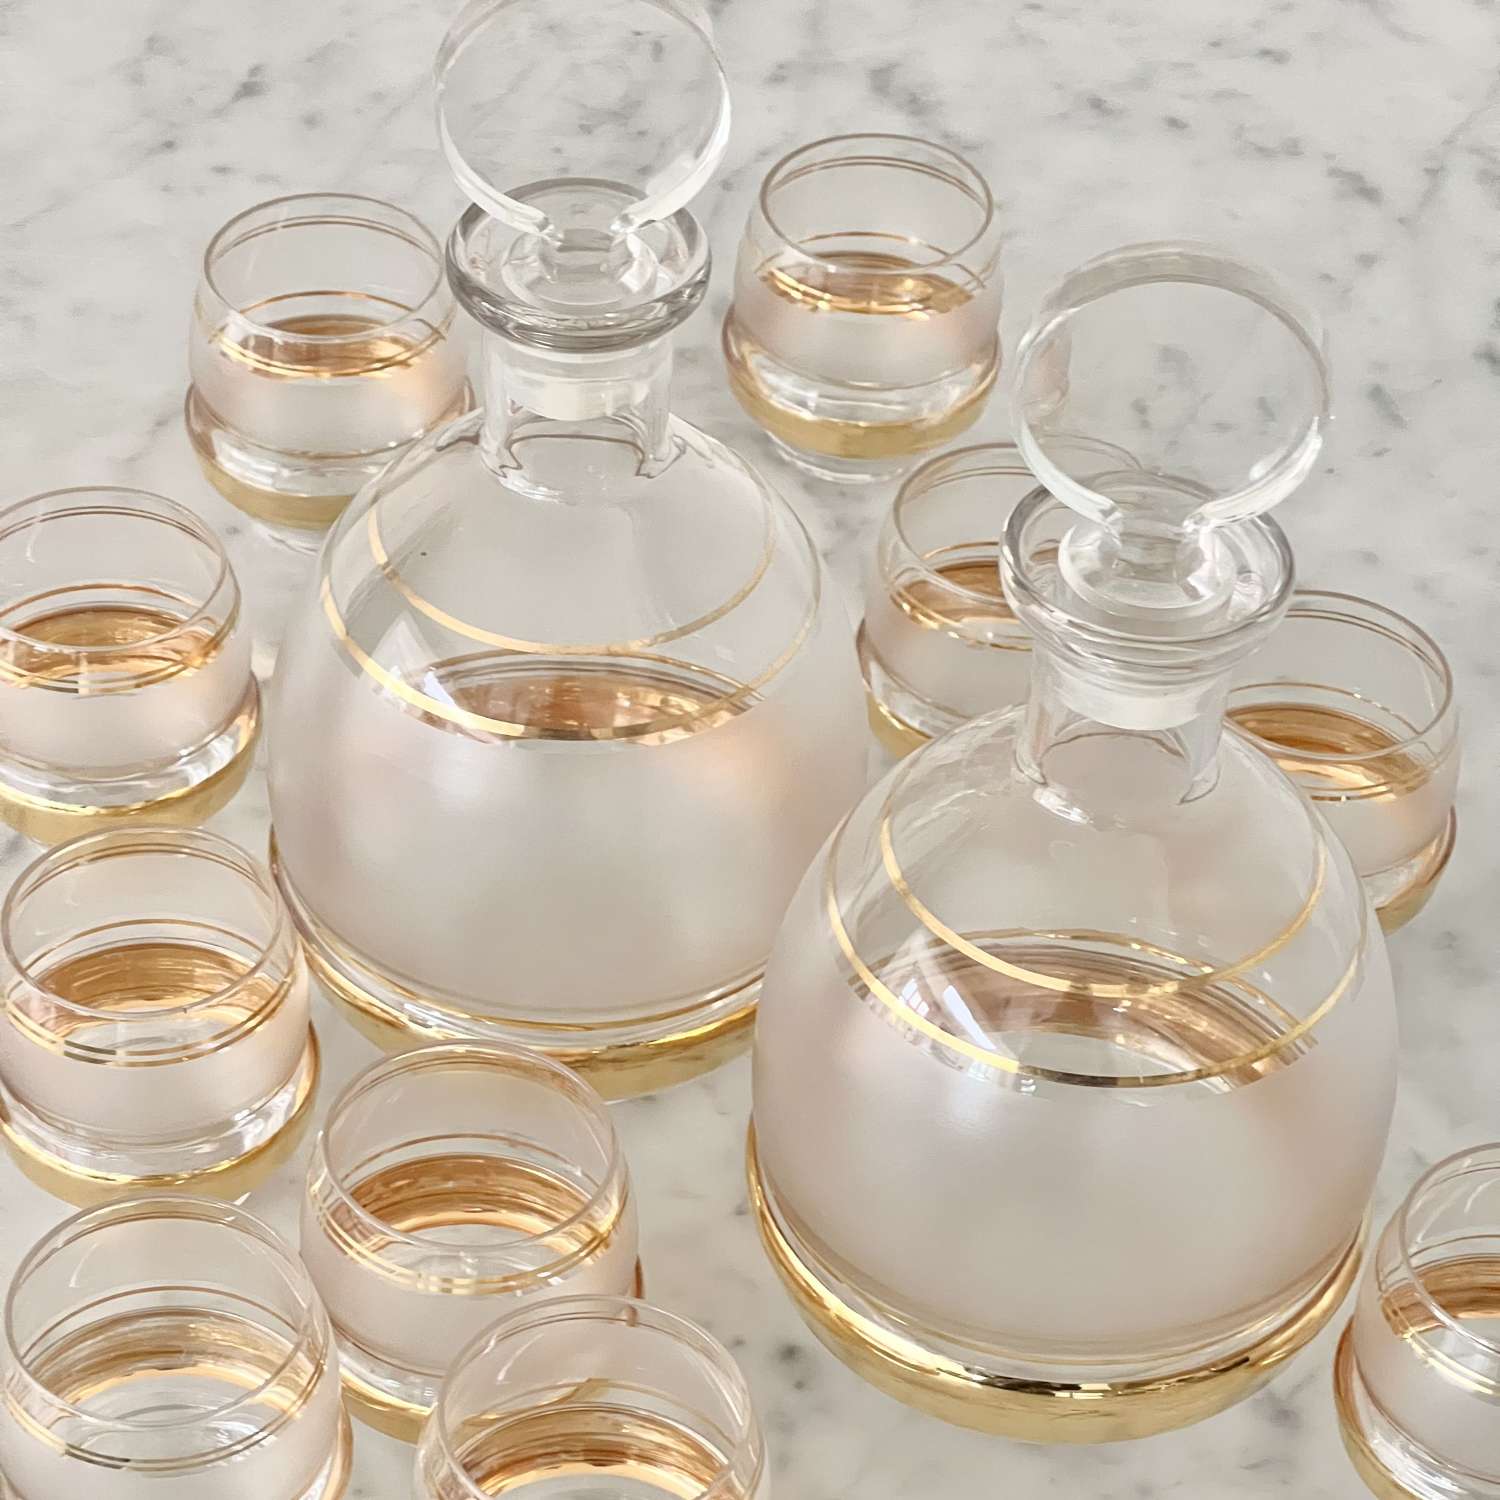 Gold & Opaque Decanters & 10 Tumblers Set